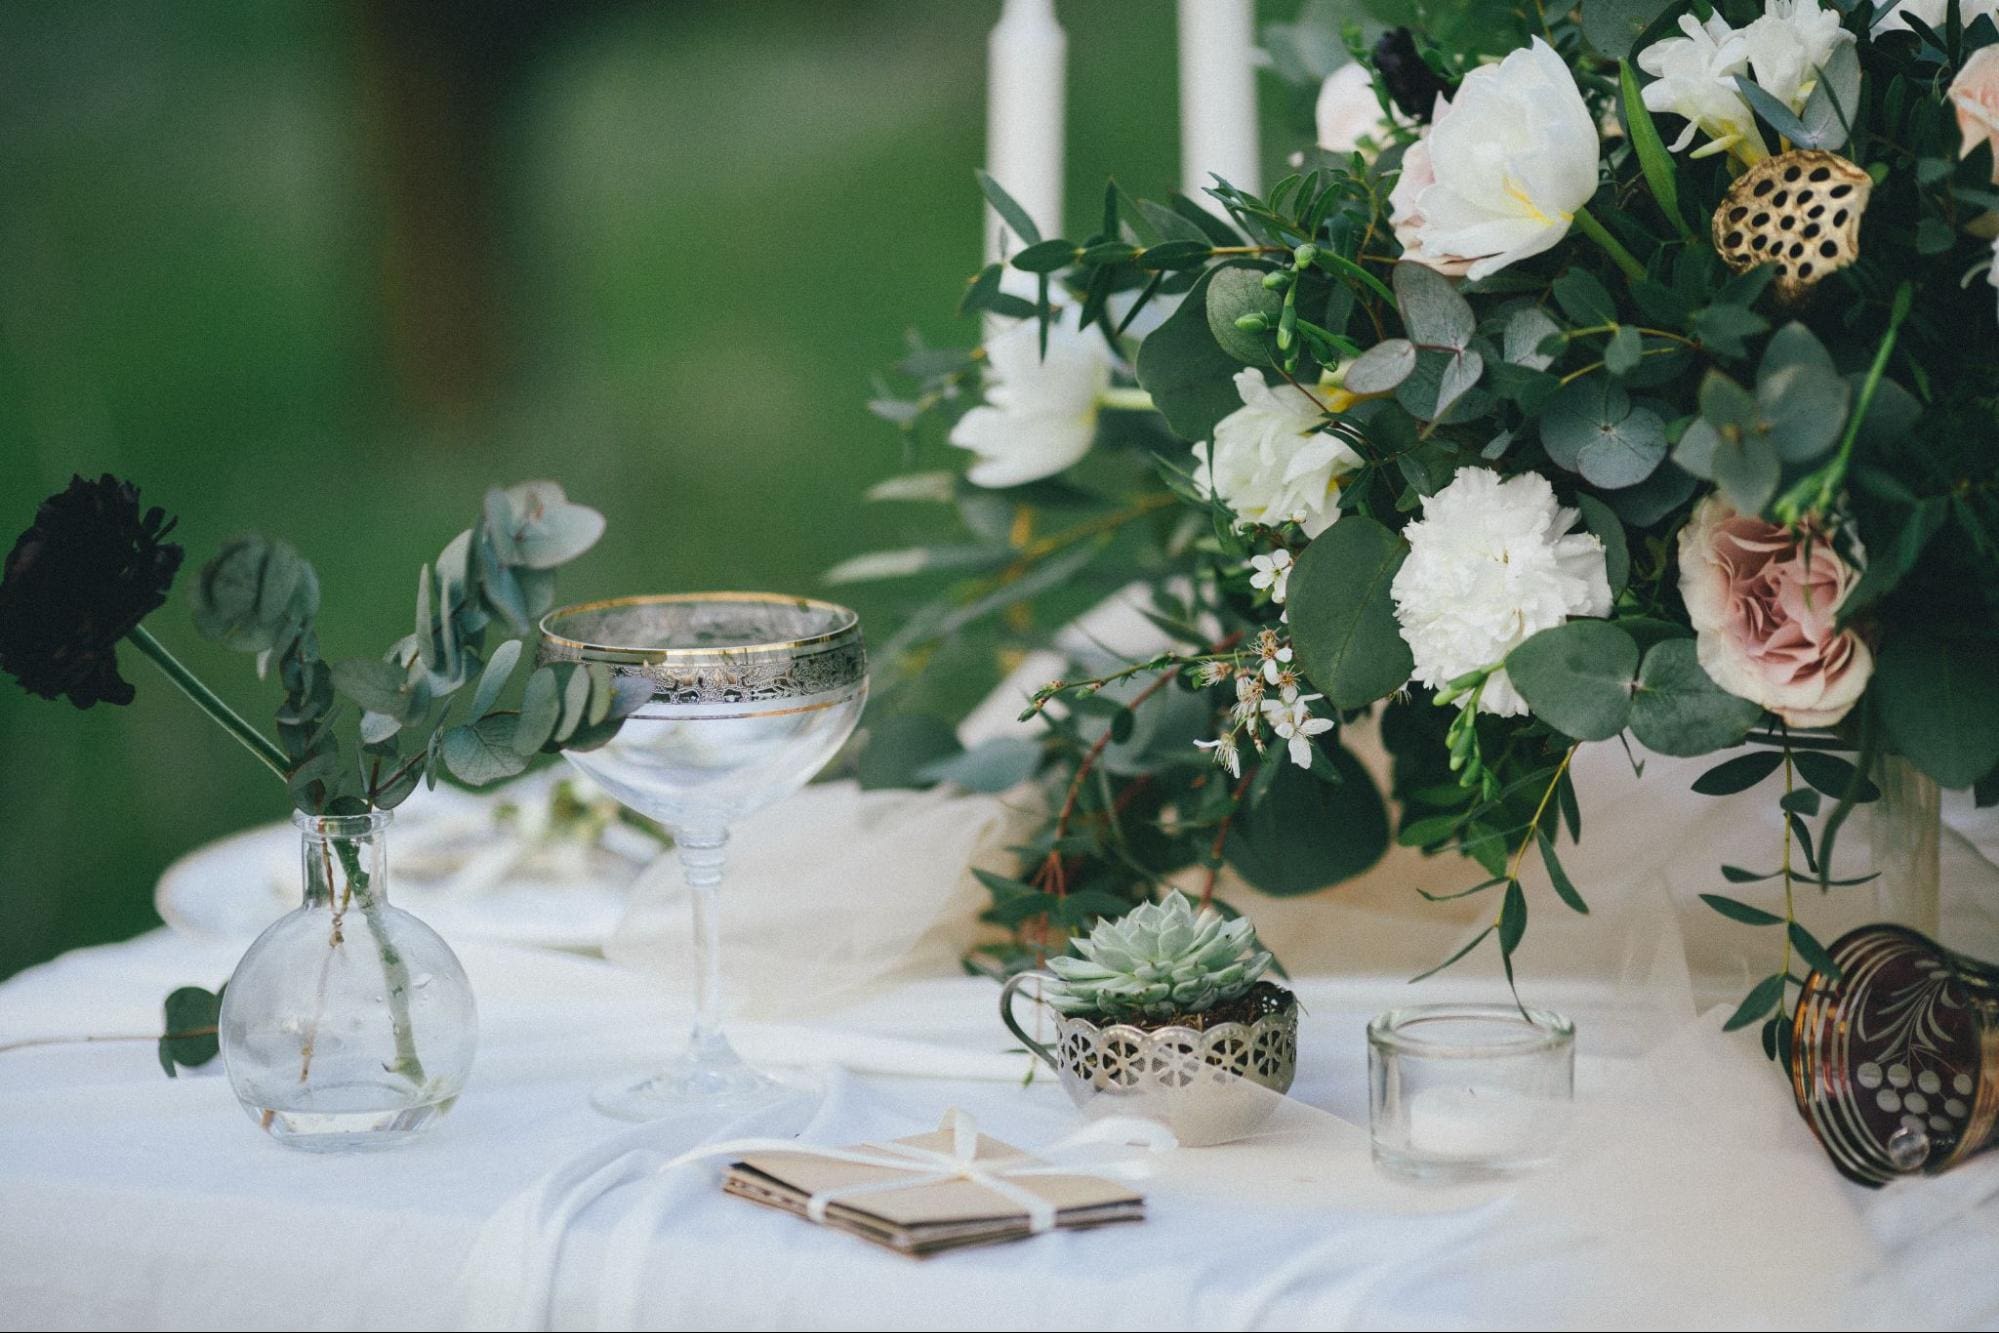 Elegant wedding table setting with lush floral arrangement, vintage glassware, and succulents, creating a sophisticated and romantic atmosphere.